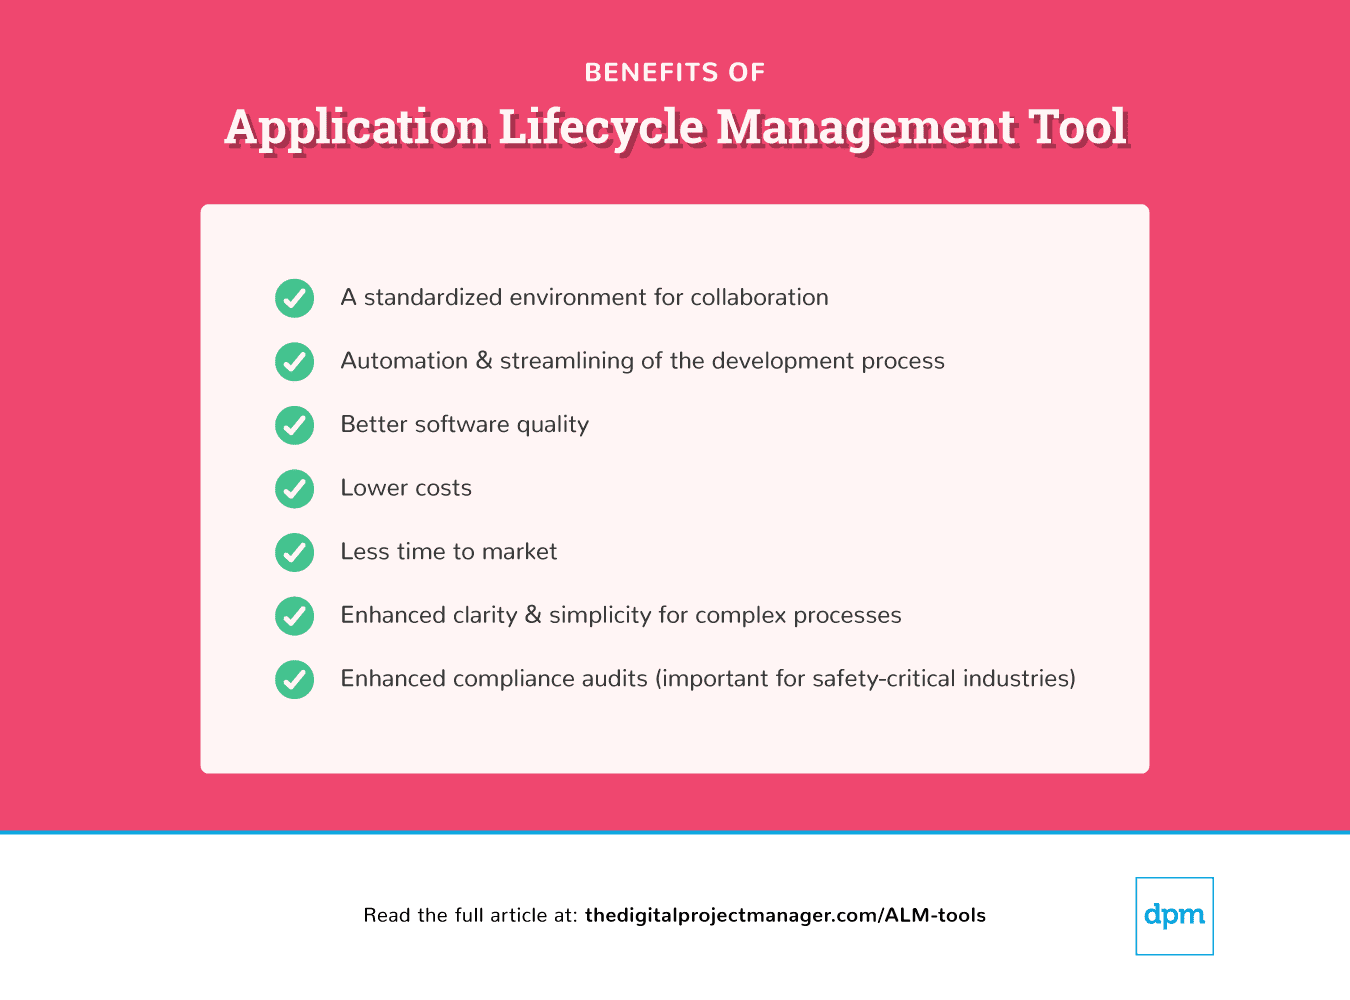 Benefits of application lifecycle management tool